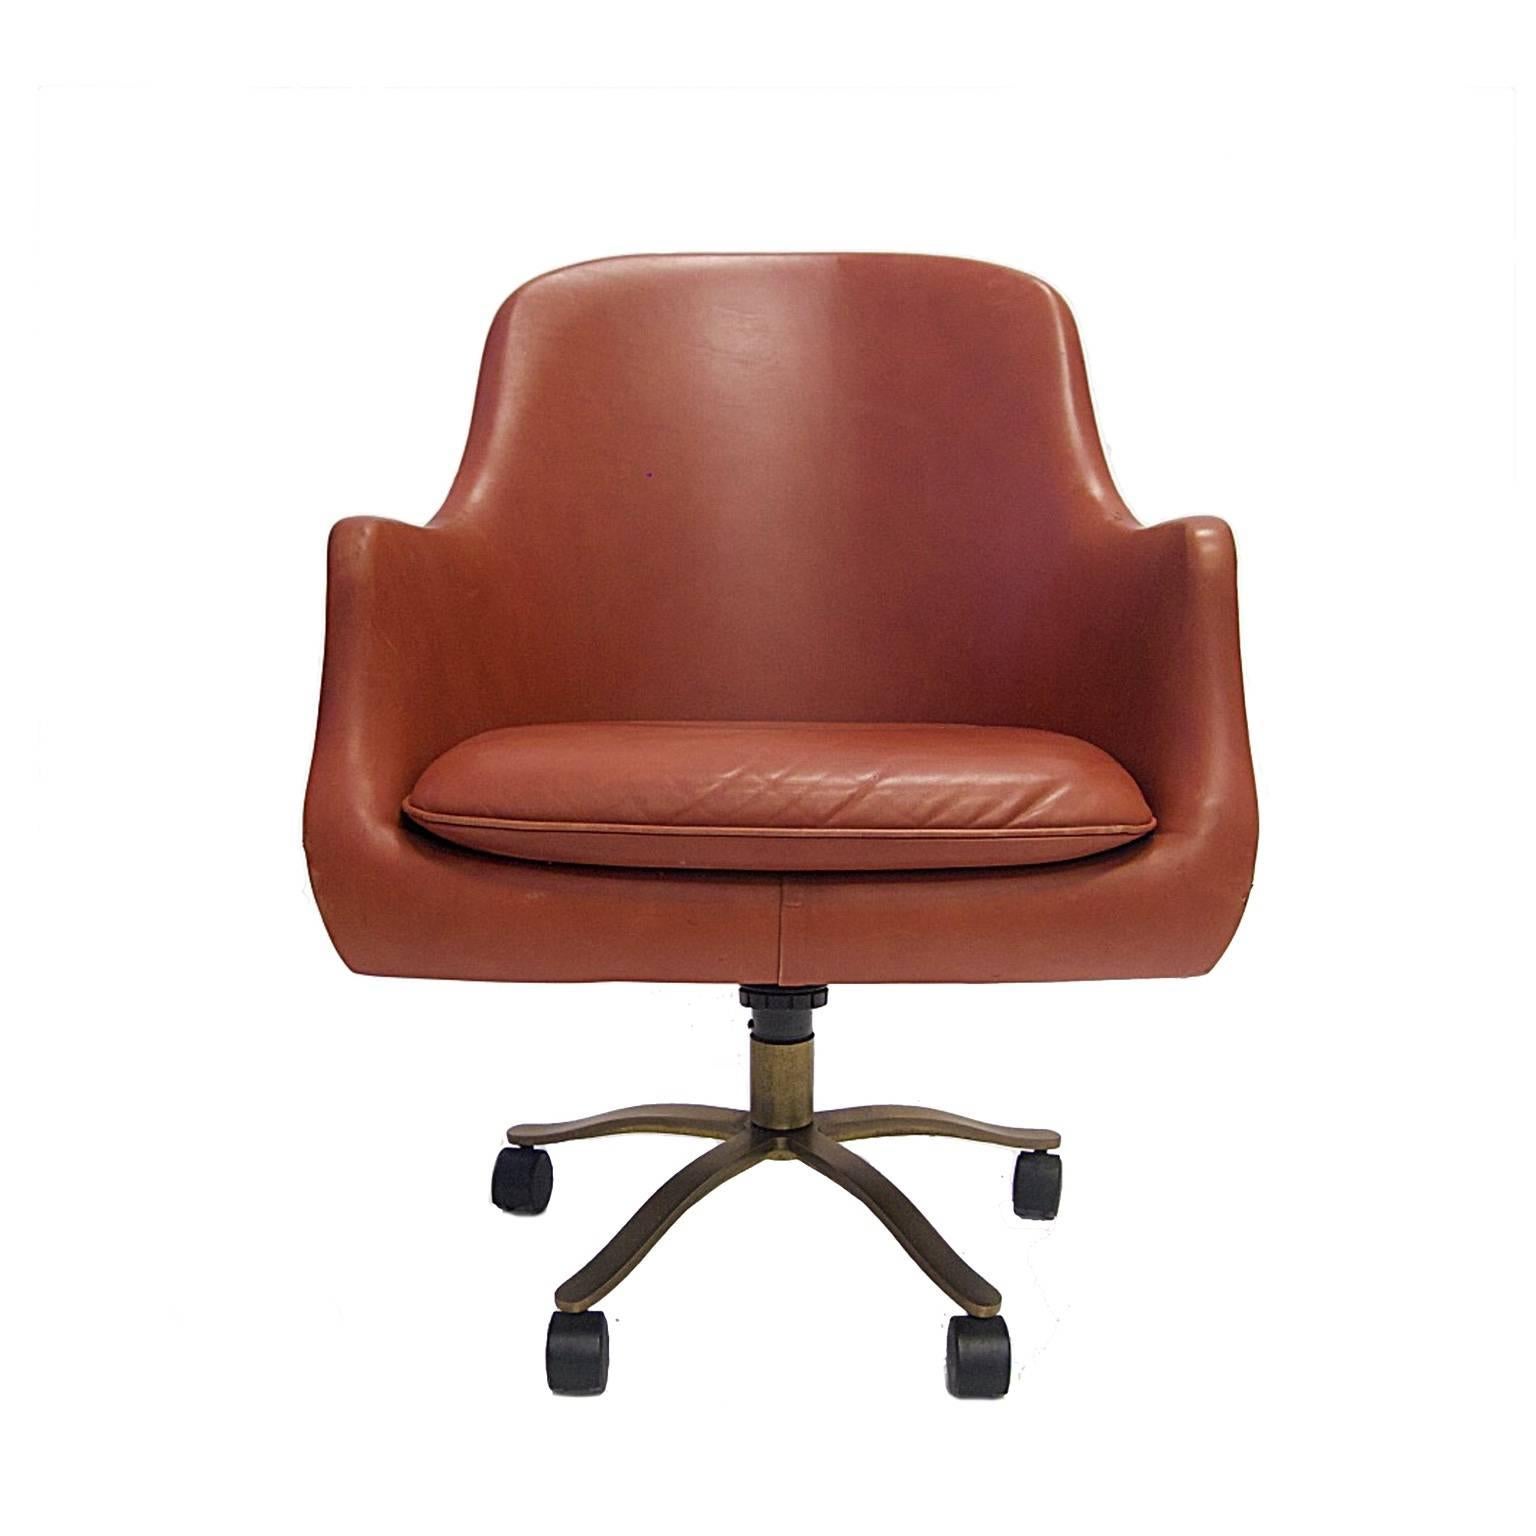 Nico Zographos Red Leather English Office Desk Chair with Brass Base on Casters